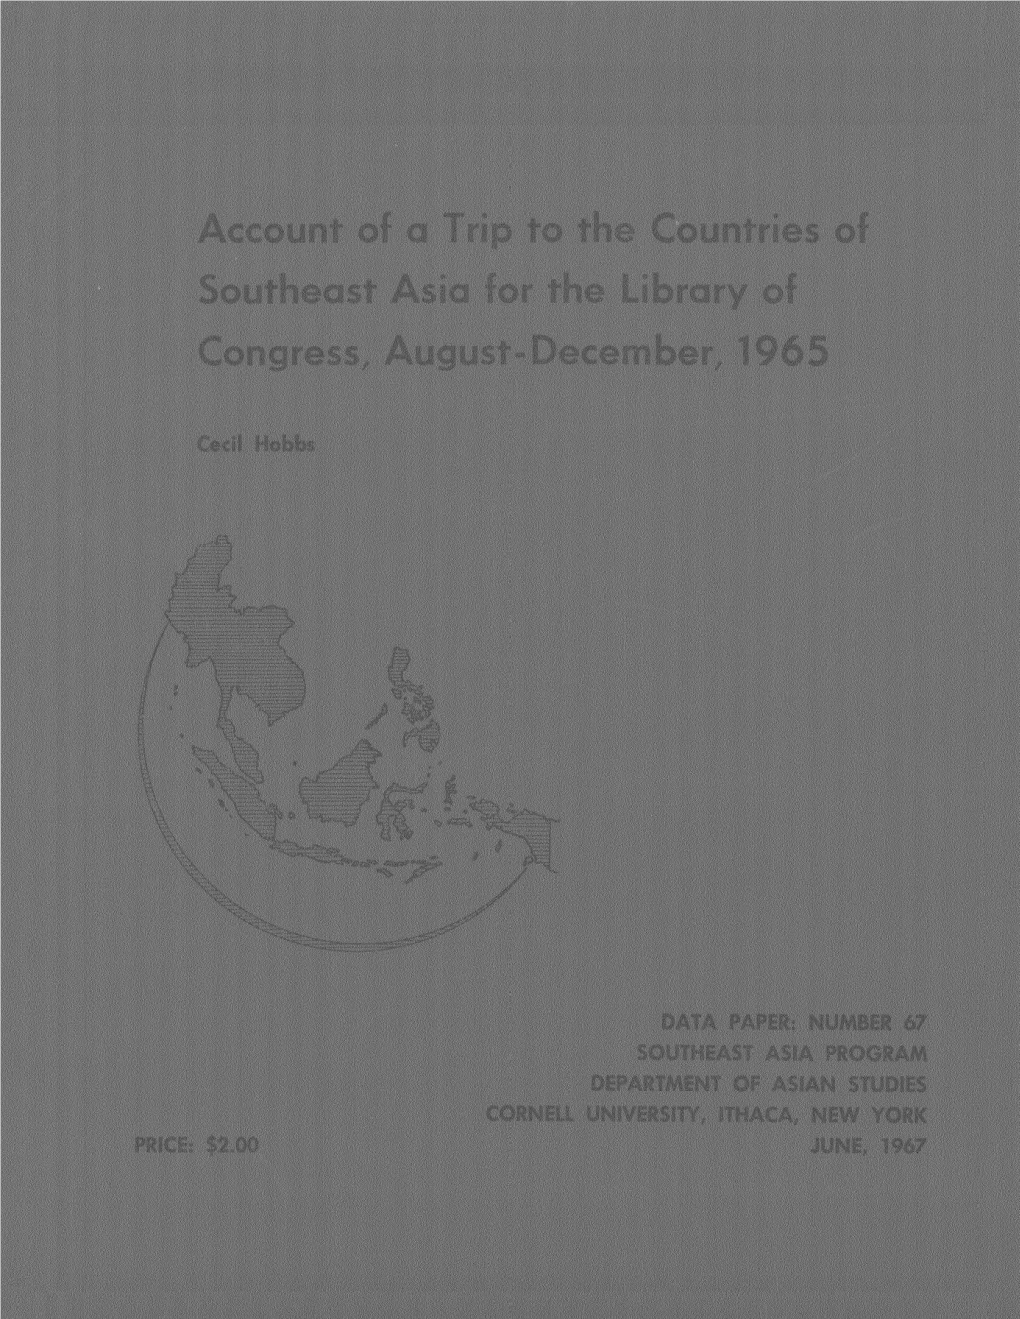 ACCOUNT of a TRIP to the COUNTRIES of SOUTHEAST ASIA for the LIBRARY of CONGRESS, AUGUST-DECEMBER 1965 @ Southeast Asia Program